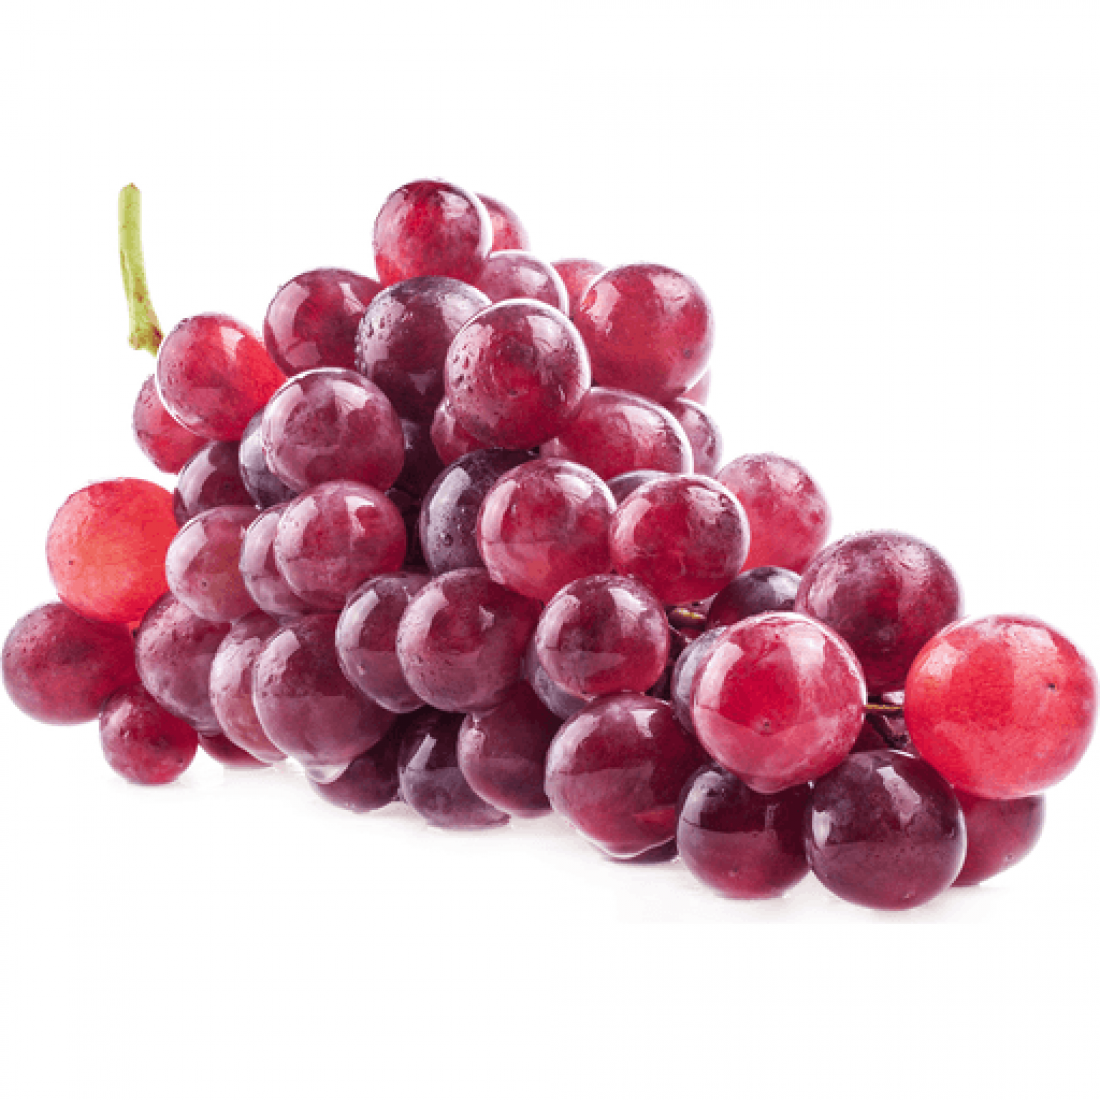 USA Red Seedless Grapes